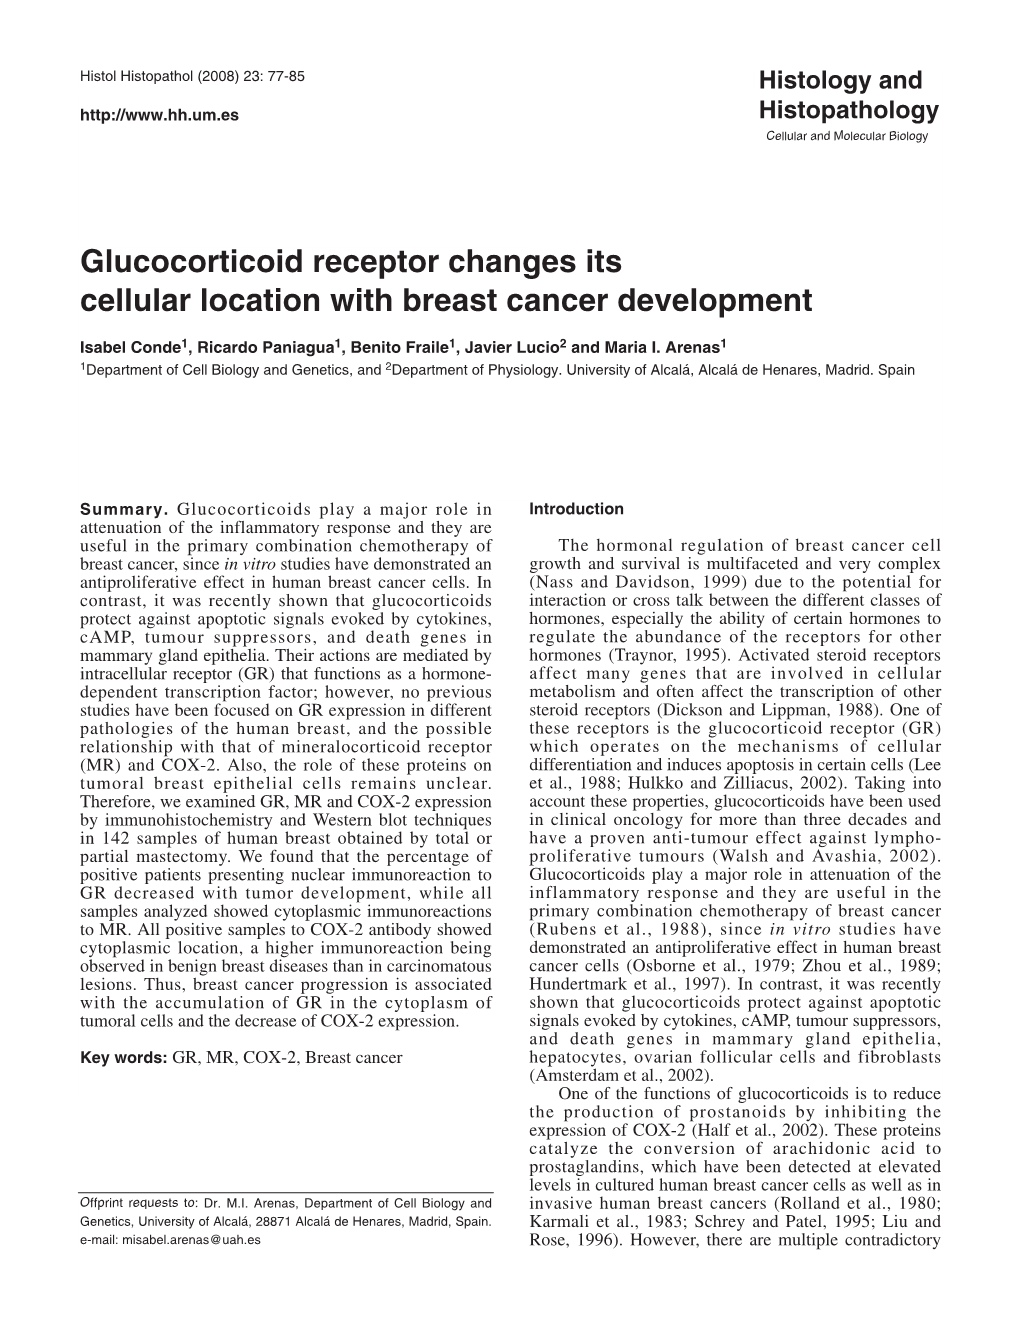 Glucocorticoid Receptor Changes Its Cellular Location with Breast Cancer Development